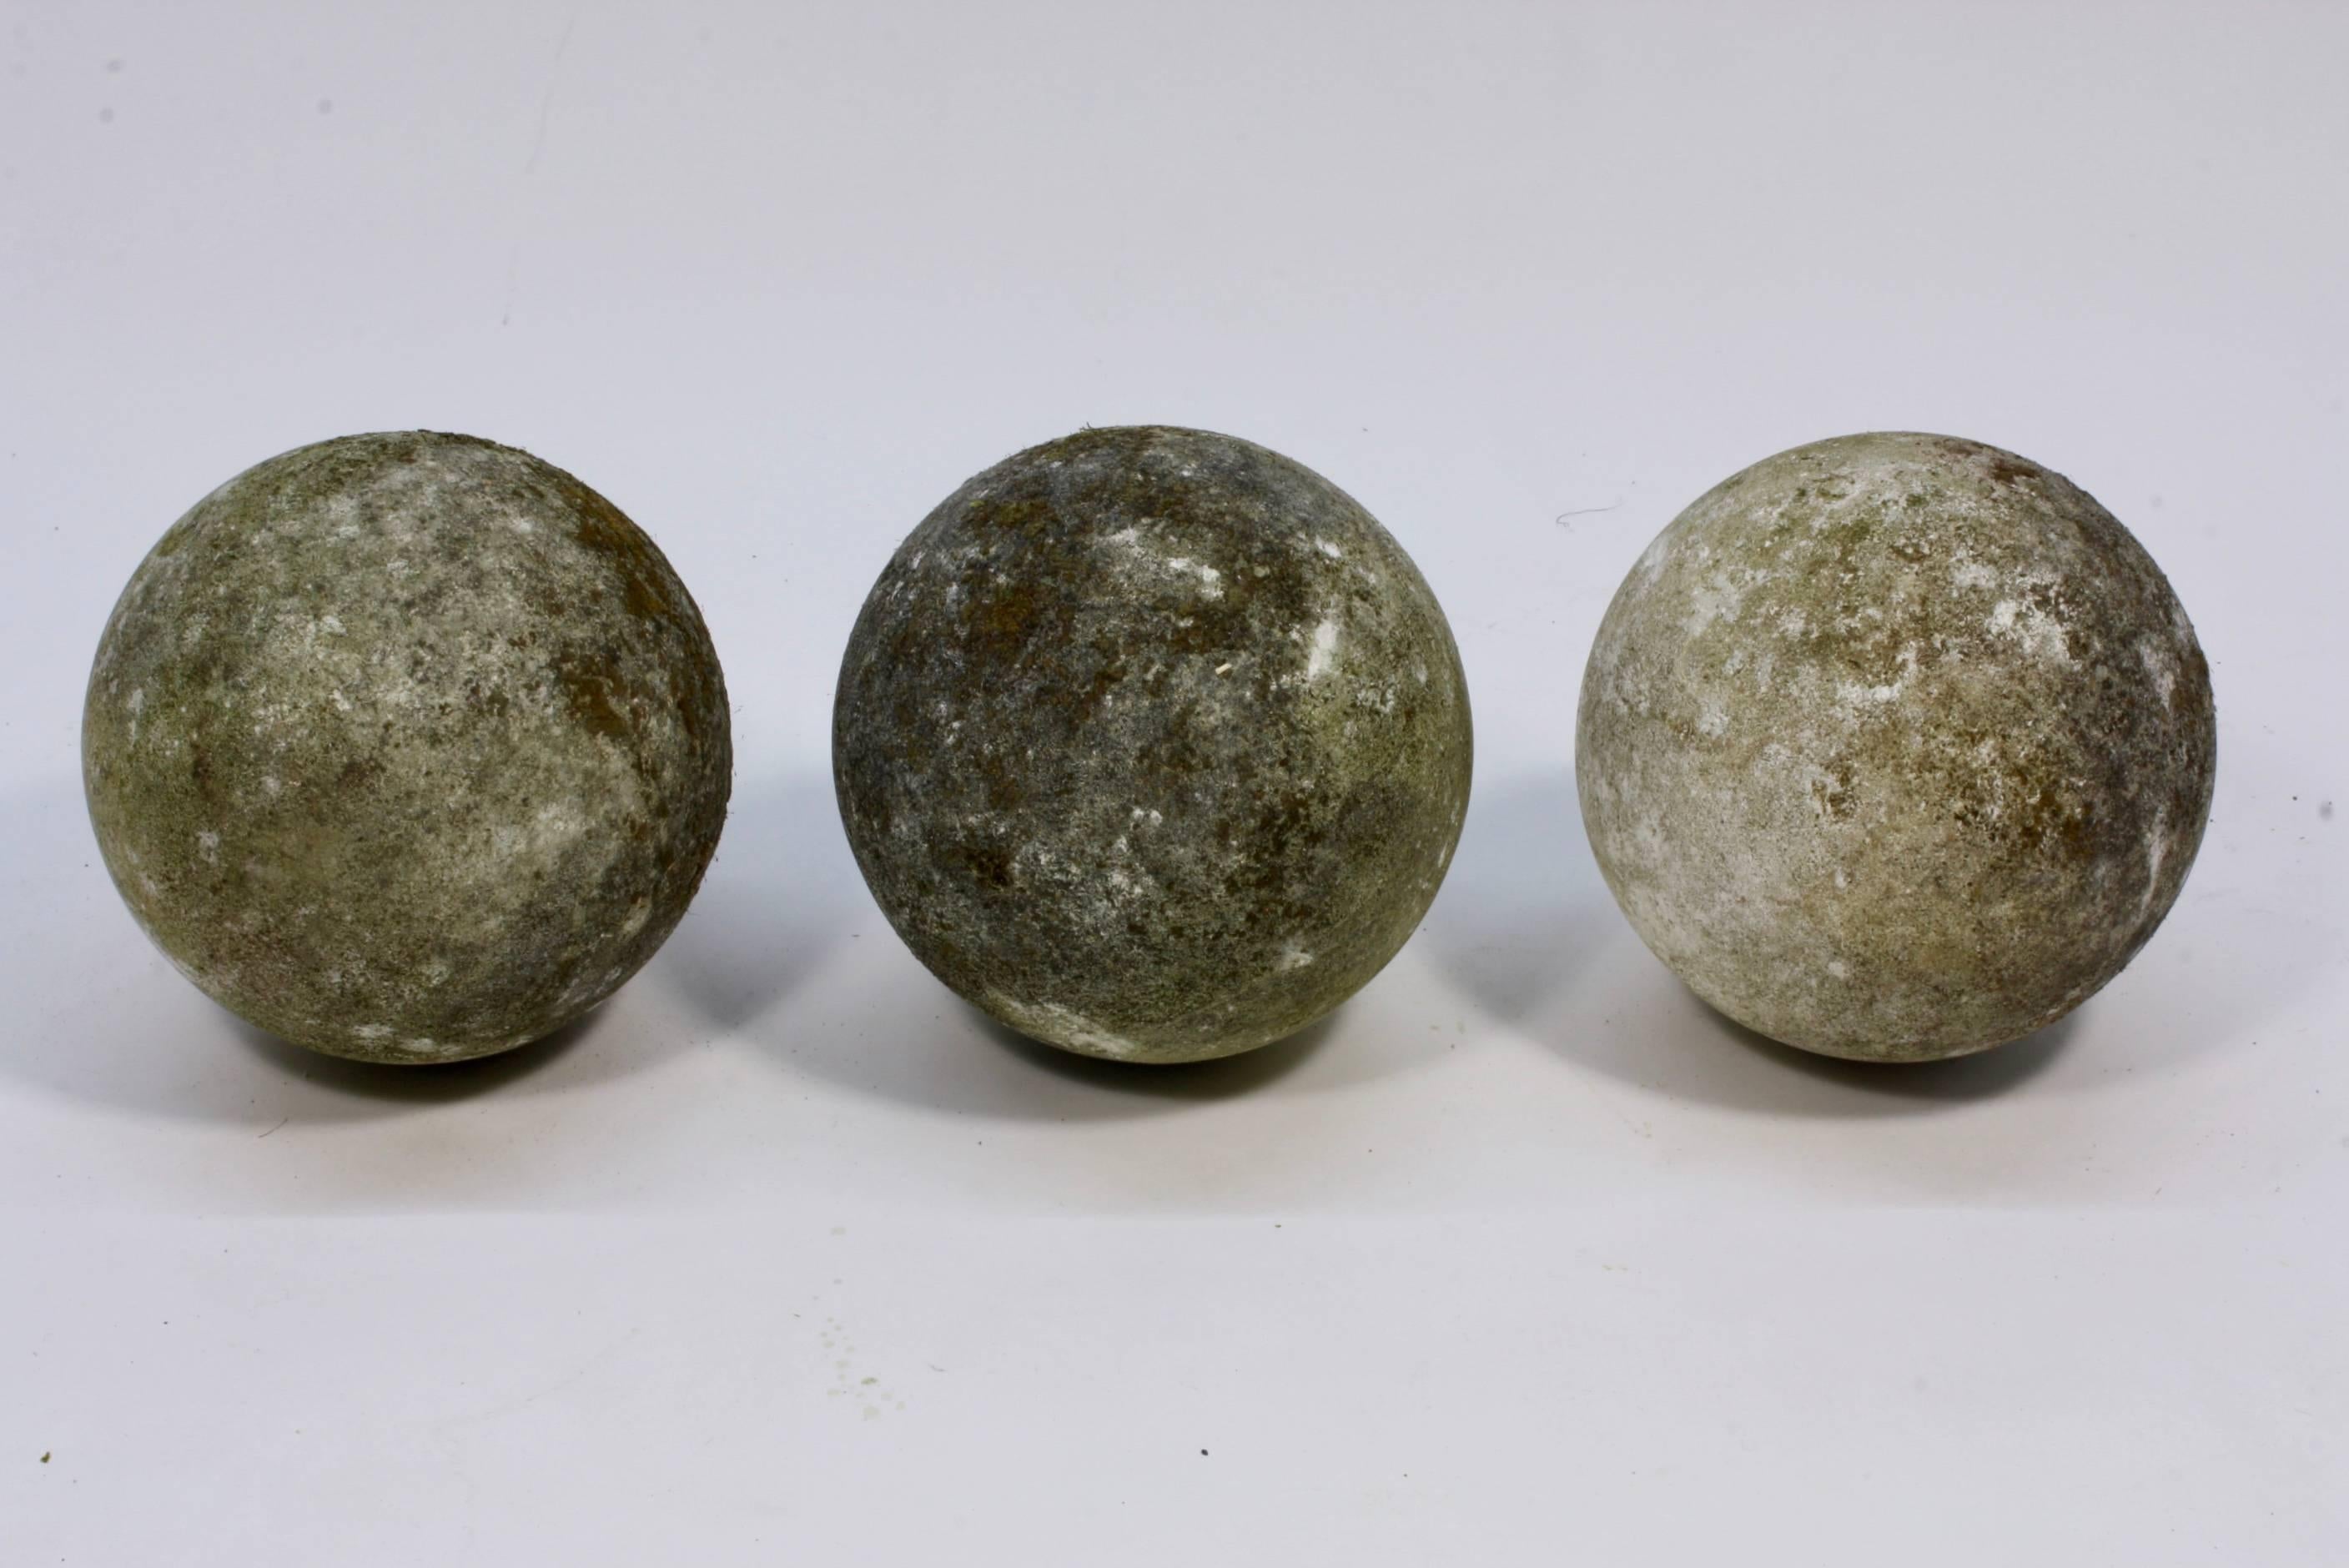 Set of three large French 19th century carved stone ball finials or garden elements (possibly cast stone). Could be used as finials on a gate pillars or a wall, or as interesting garden ornaments. Each sphere weighs approximately 50 lbs.